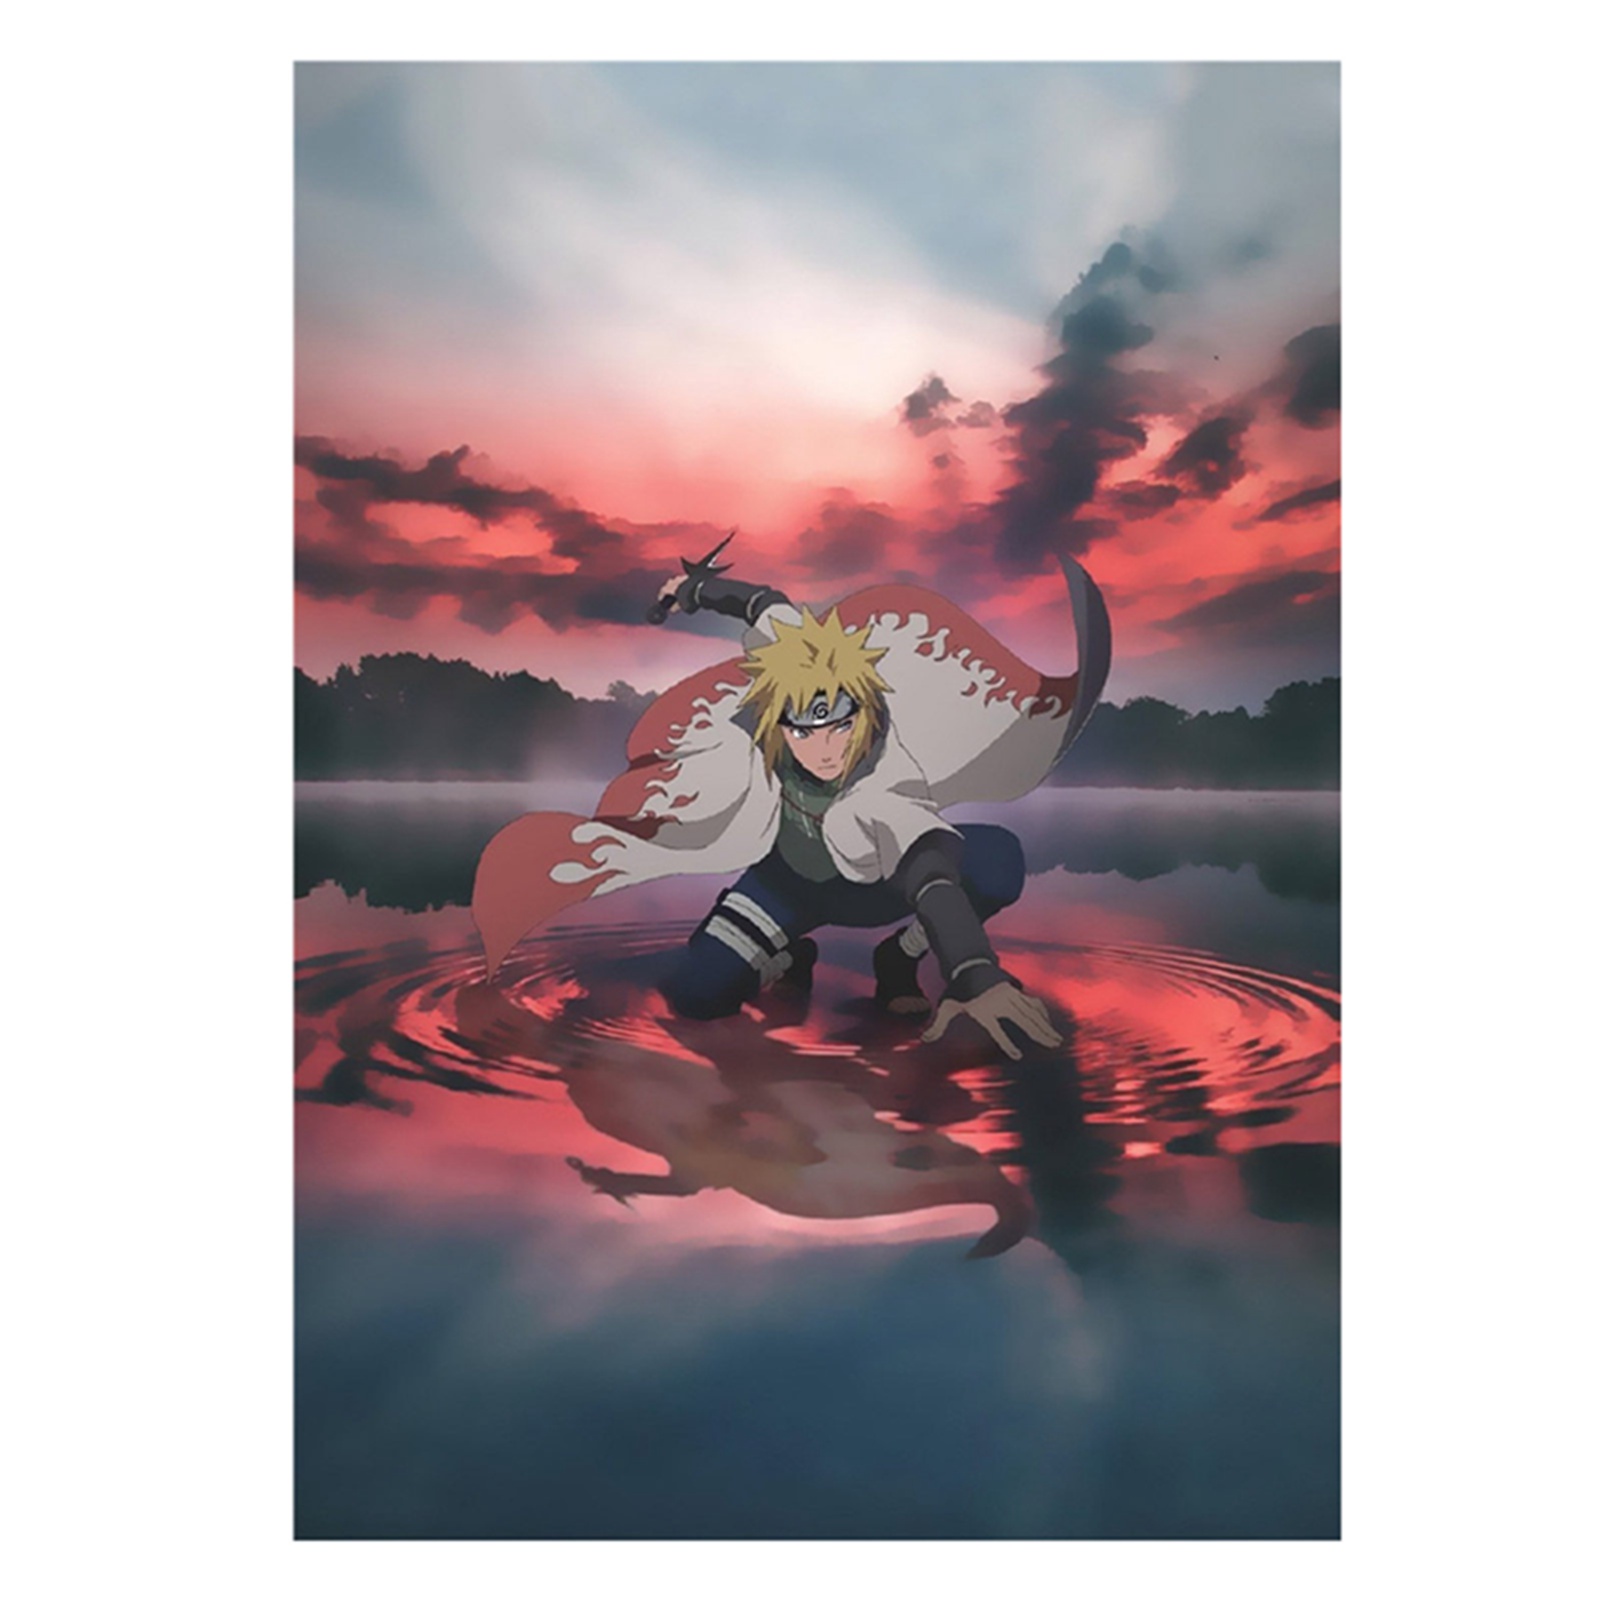 Hit Upon Anime Naruto Shippuden Wall Scroll Poster HD Print Art Fabric Poster 11 x 16 inches